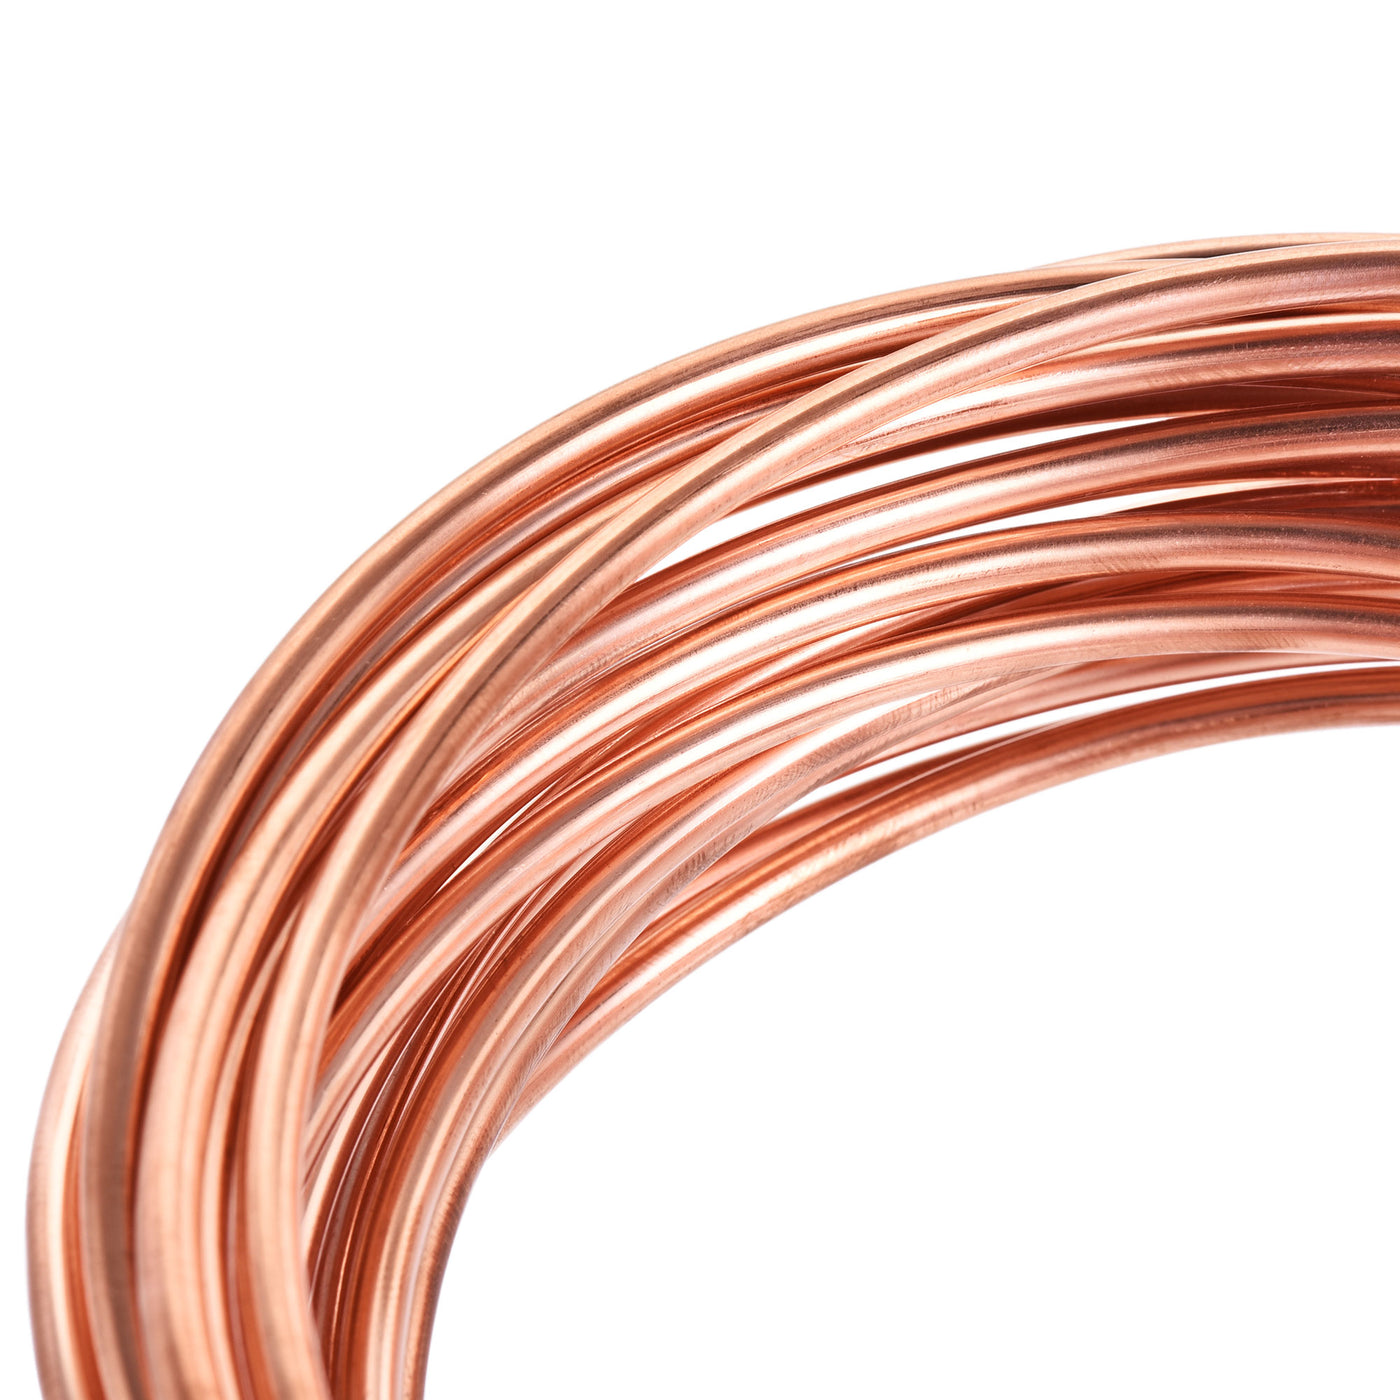 uxcell Uxcell Refrigeration Tubing Copper Tubing Coil for Refrigerator HVAC